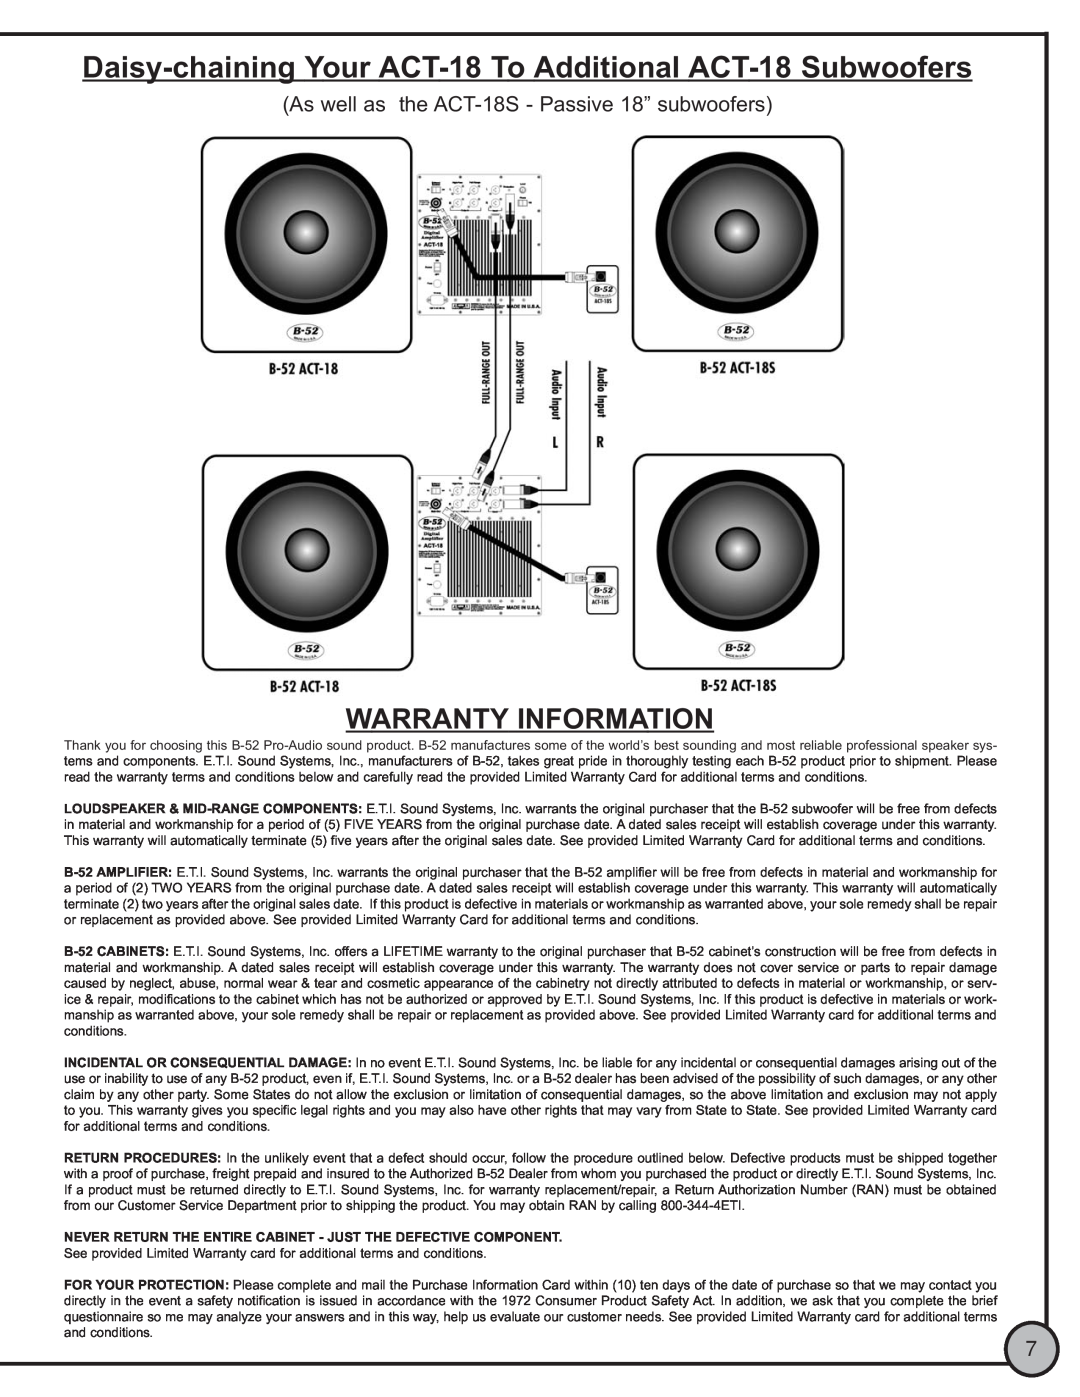 ETI Sound Systems, INC ACT18 manual Warranty Information, As well as the ACT-18S- Passive 18” subwoofers 